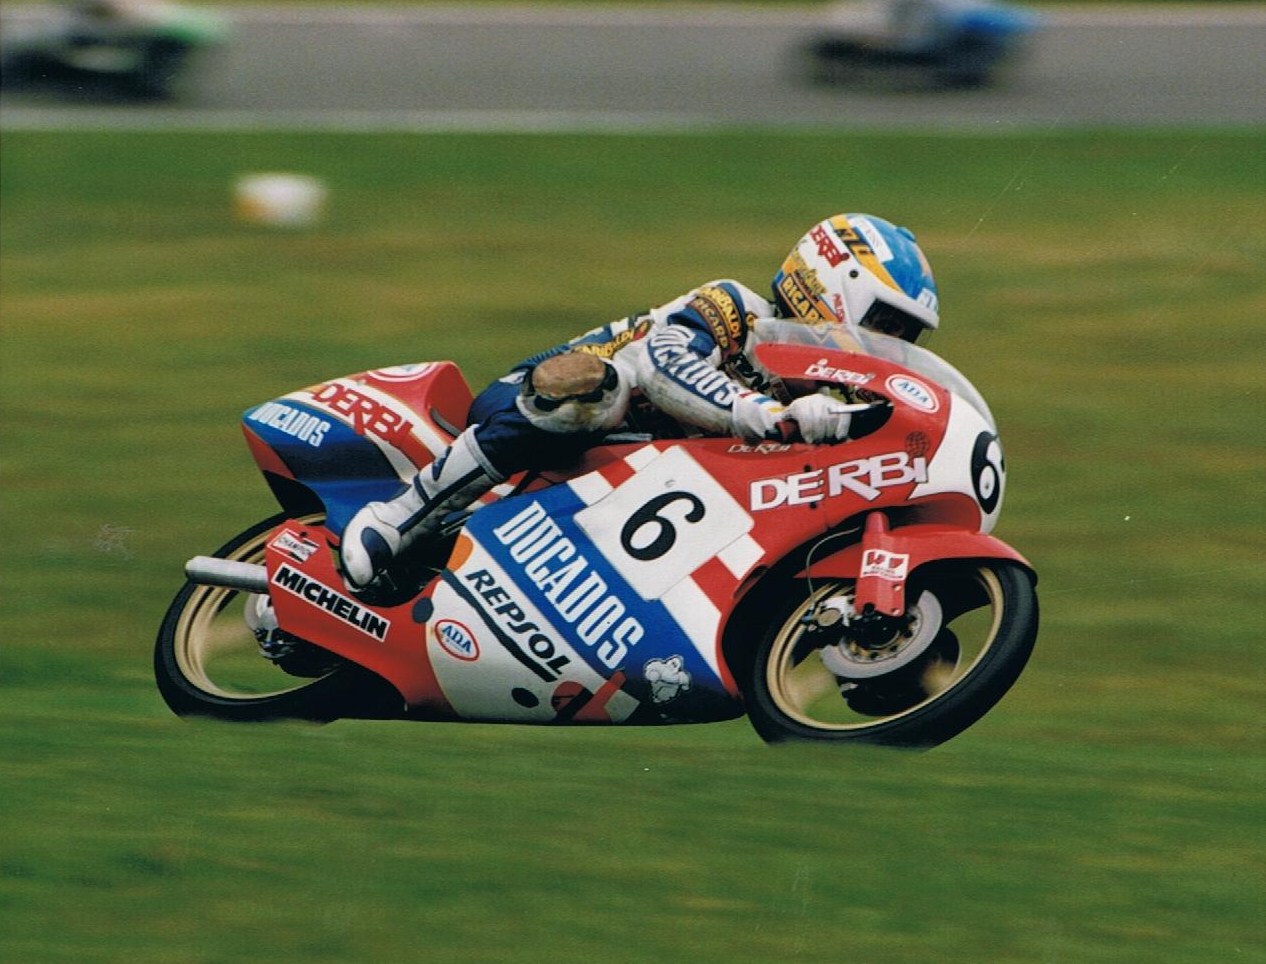 Alex Criville at Assen, 1988. Credit: Phil Wain's Family Archive